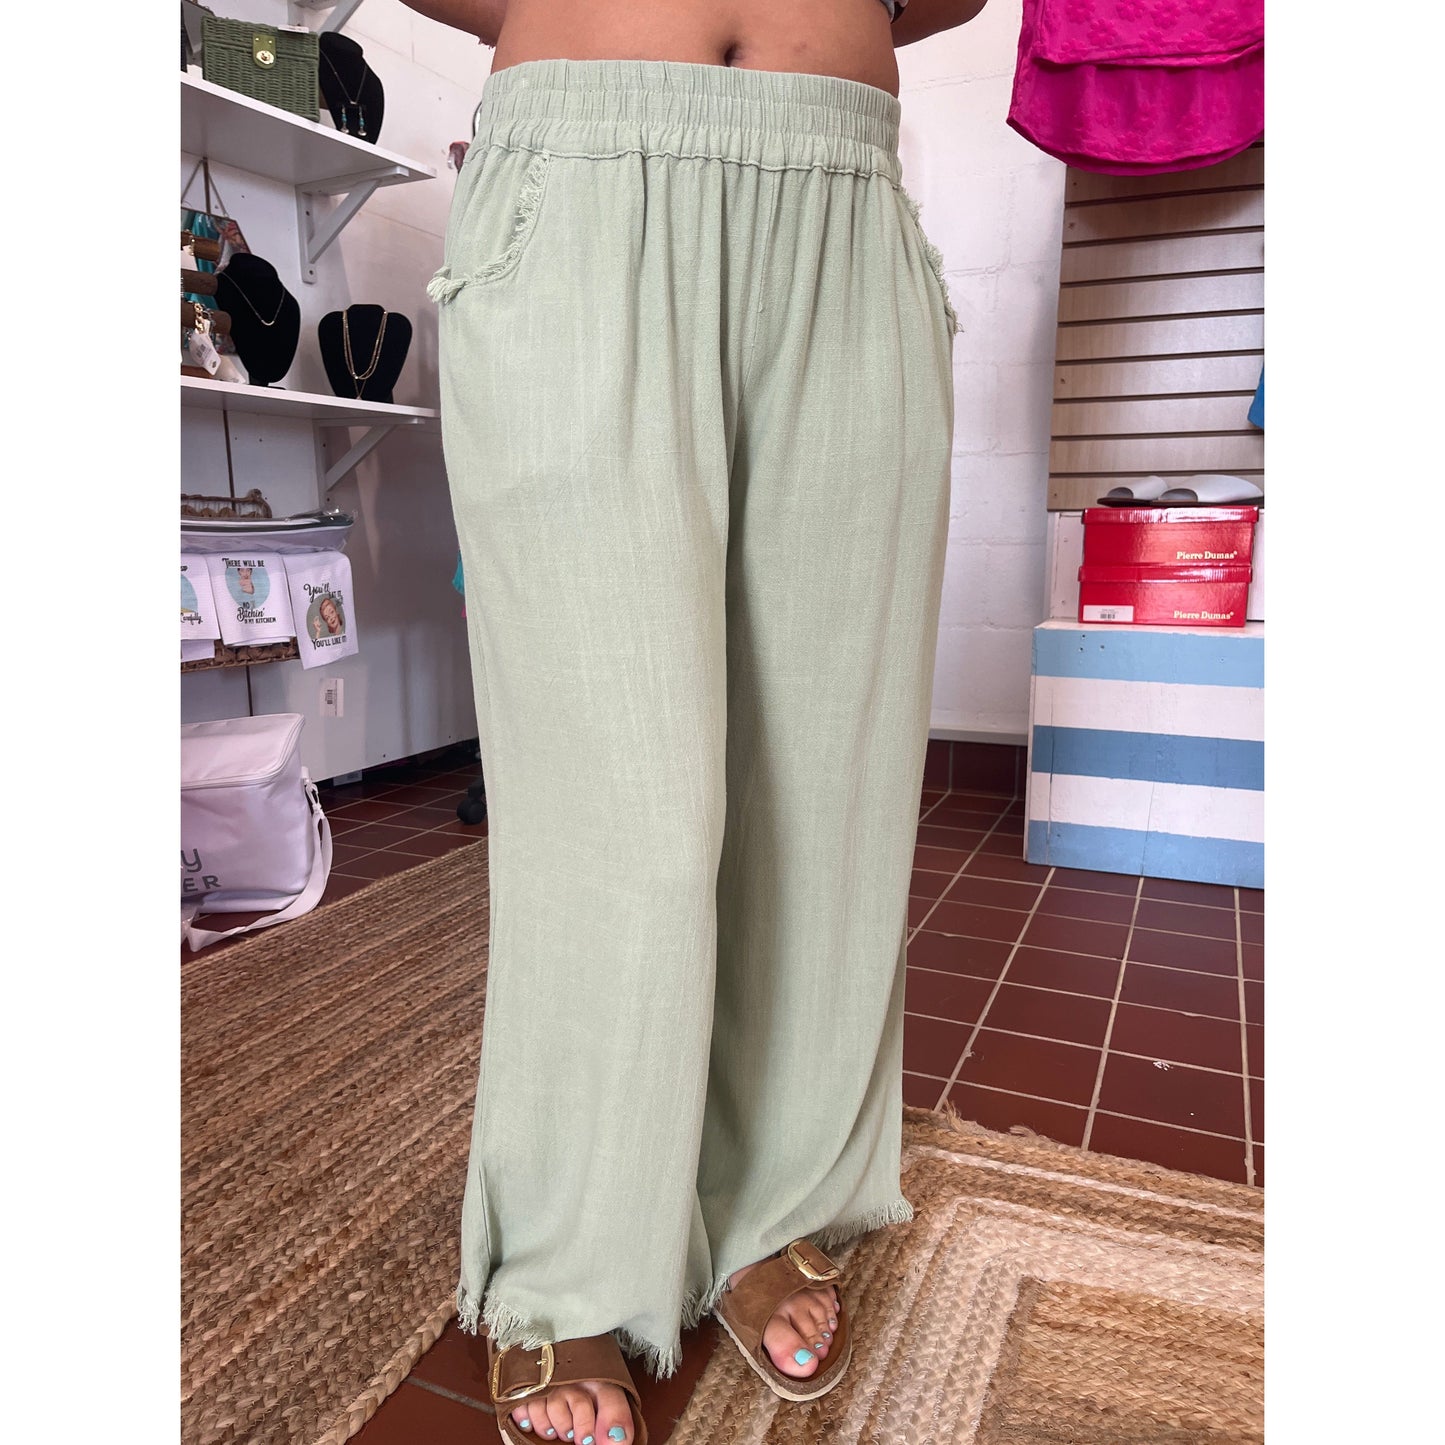 Wide leg pants with fray hems. Brand: Umgee. Available in sizes Small through Large. 55% Linen, 45% Cotton. Oatmeal